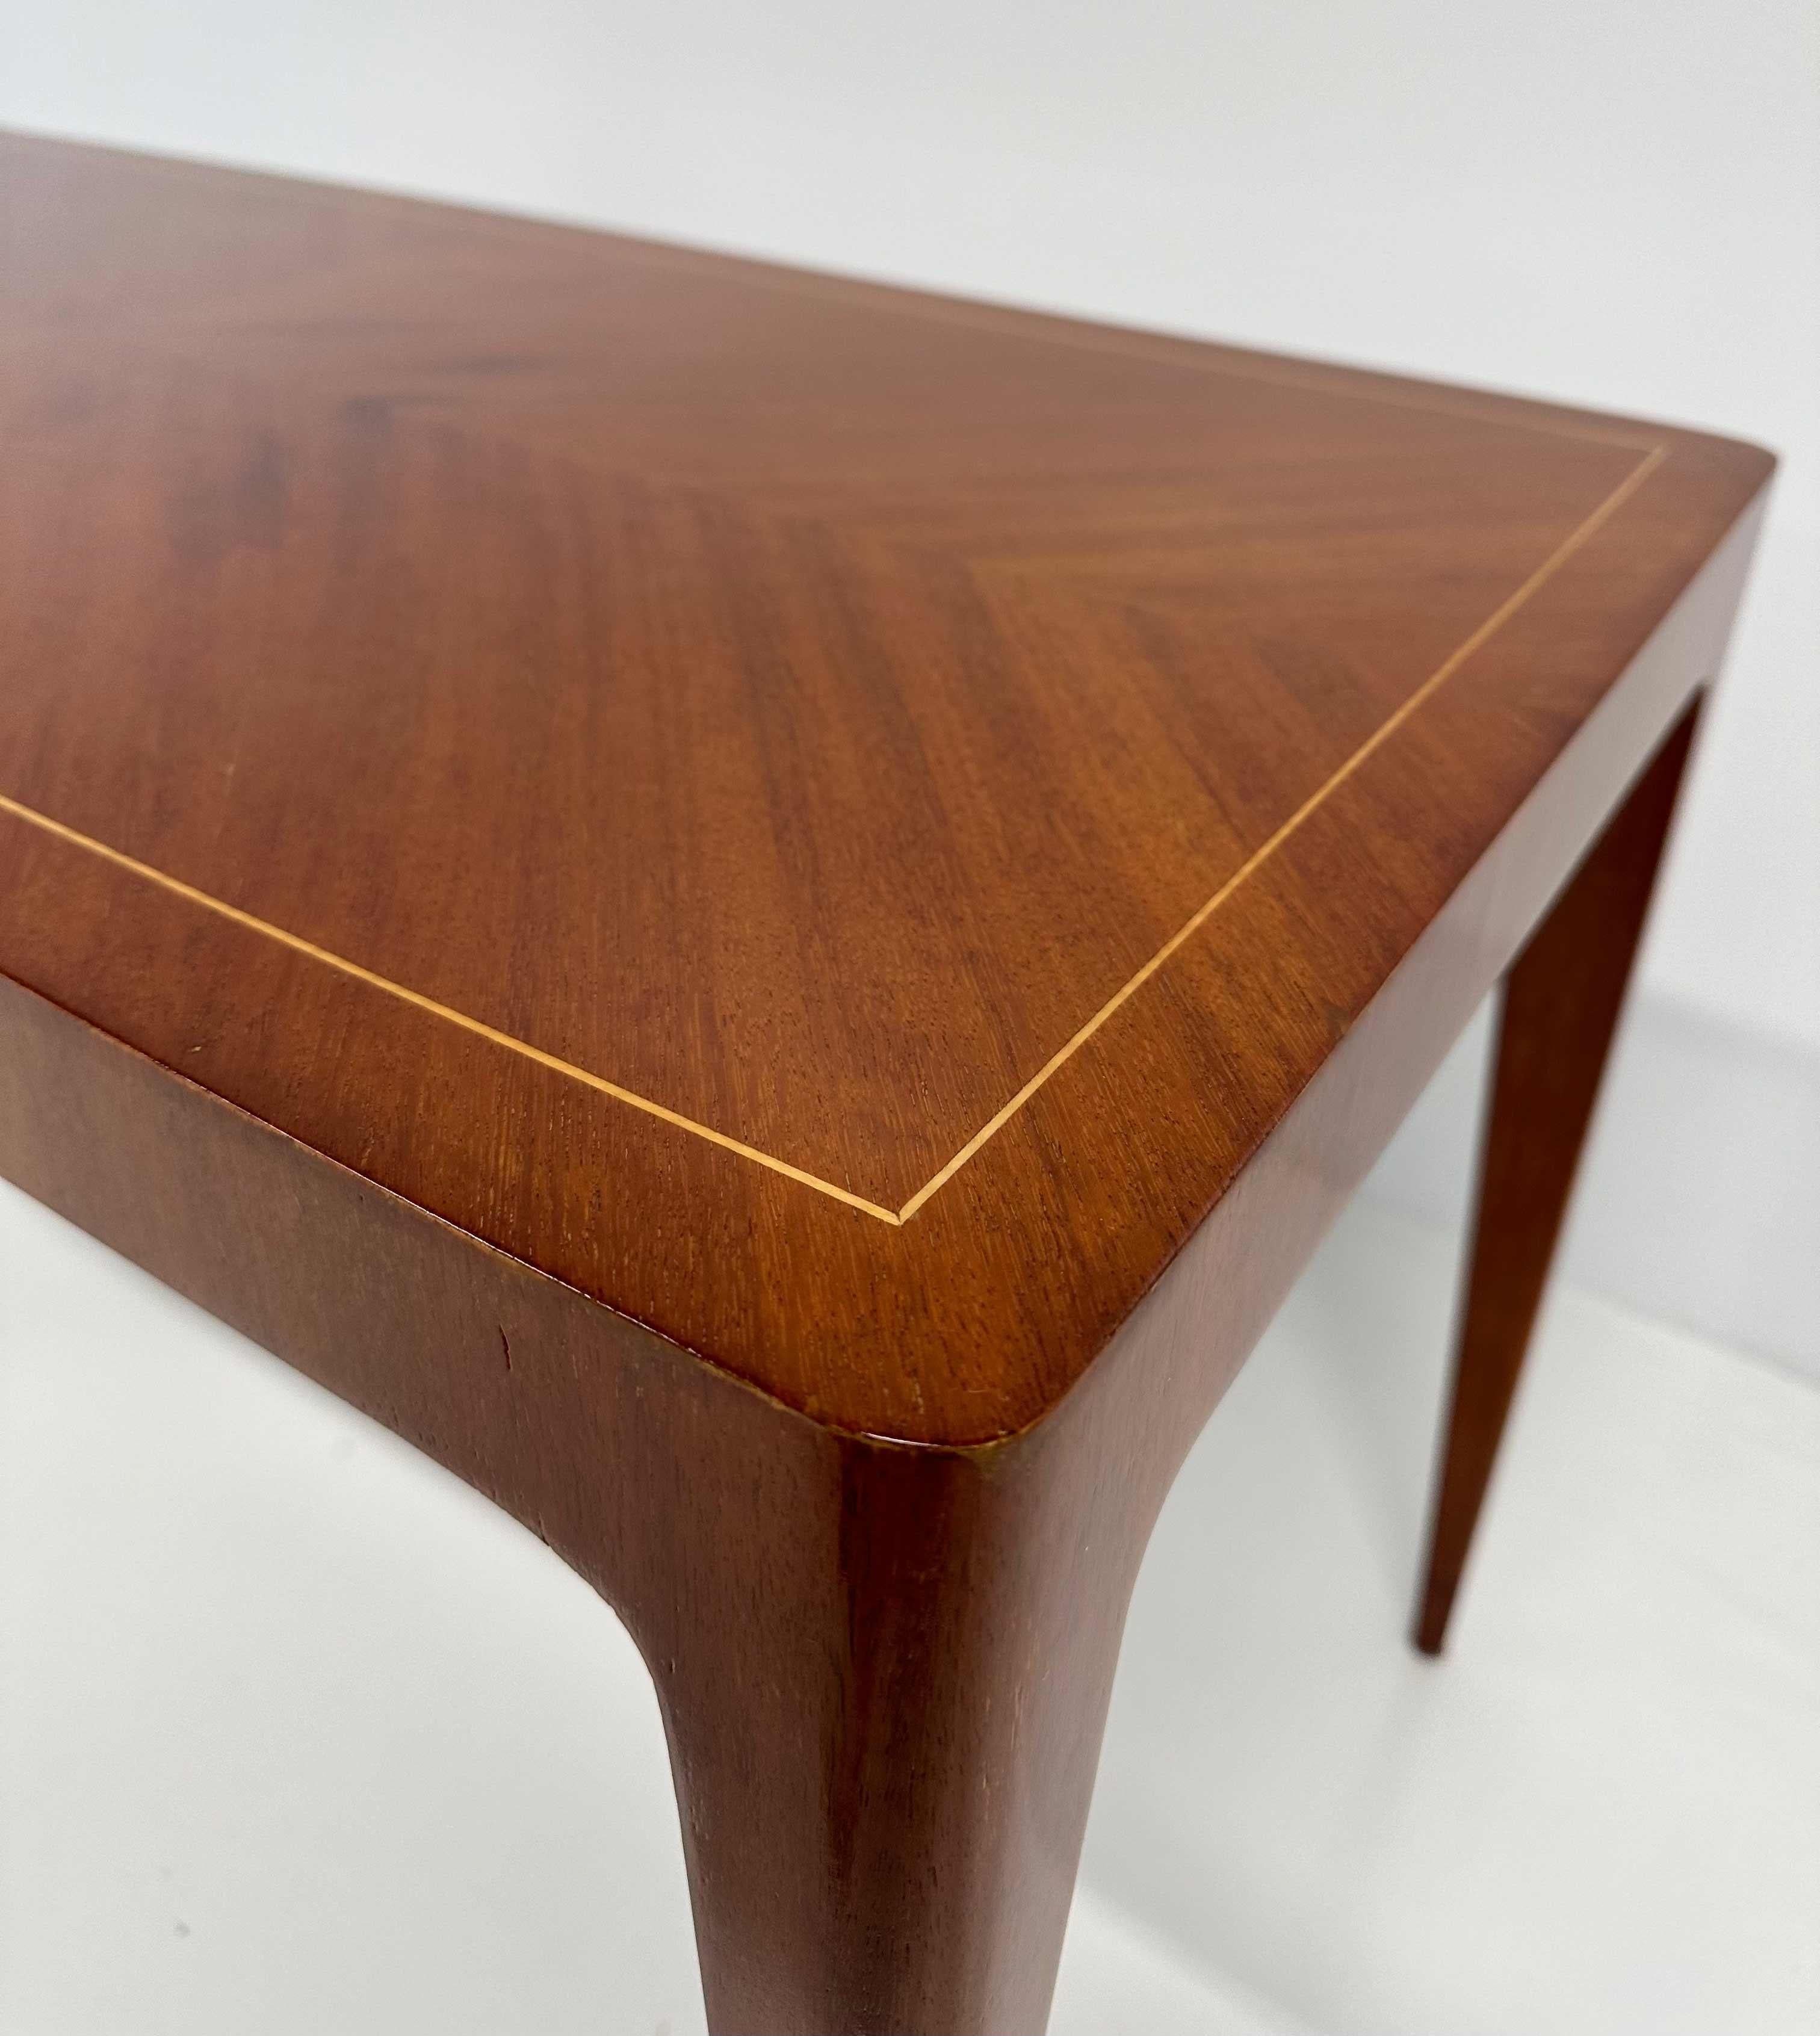 Italian Art Deco Teak and Maple Coffee Table By Paolo Buffa , 1950s For Sale 5